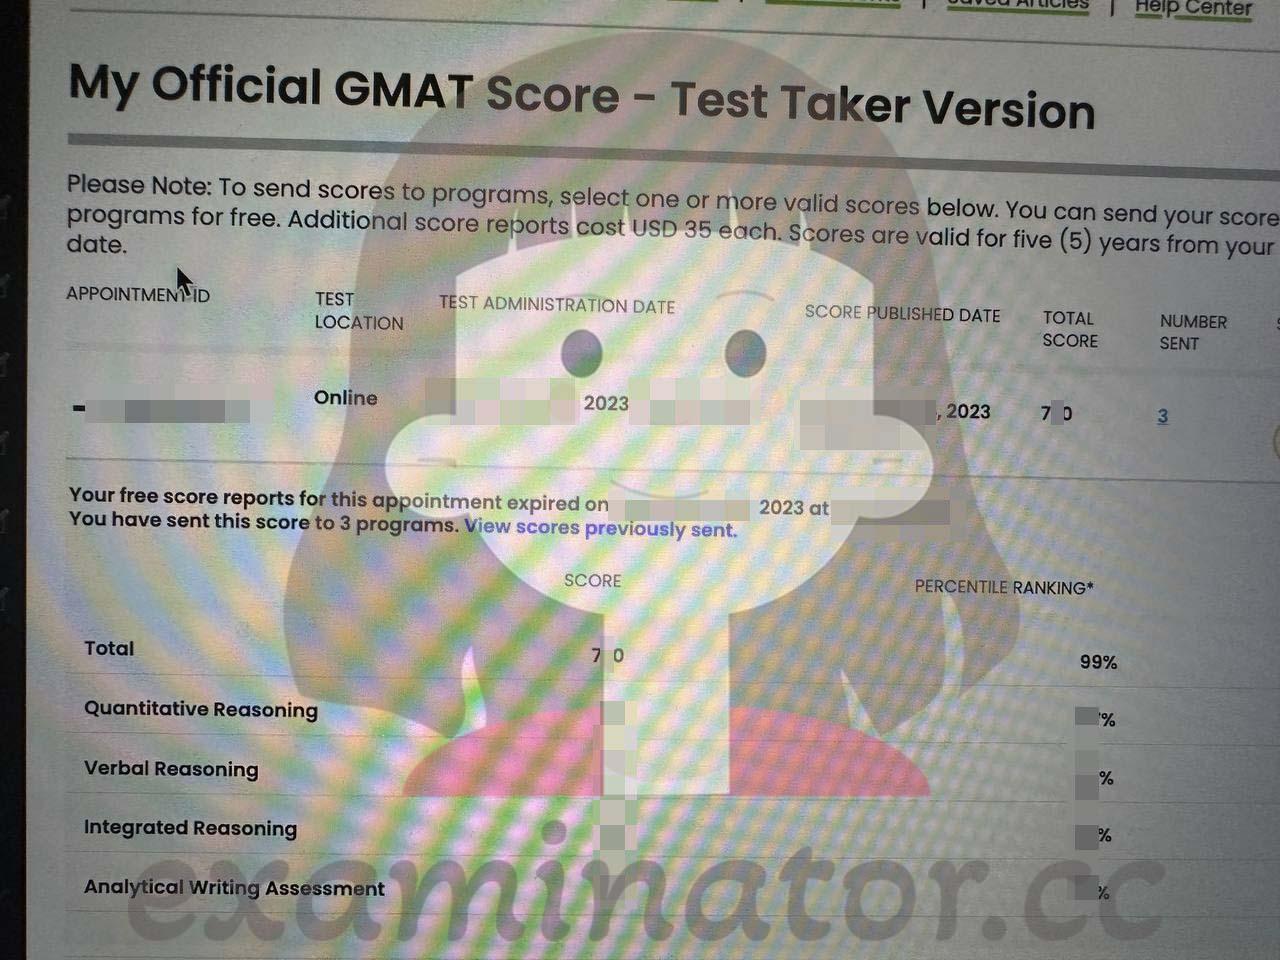 score image for GMAT Cheating success story #581